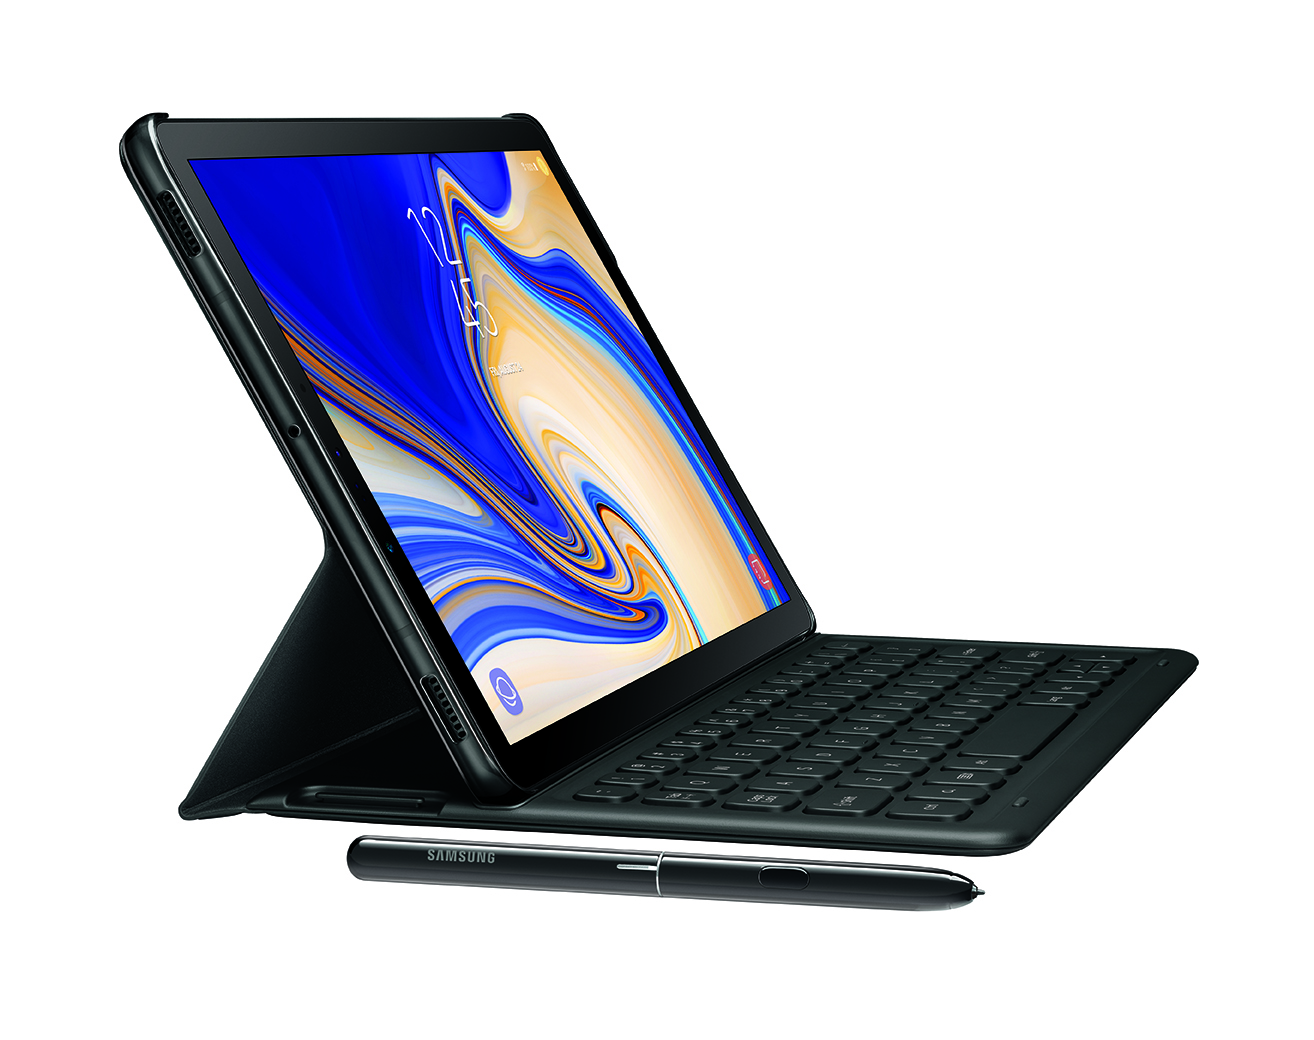 An image of the Samsung Galaxy Tab S4 with keyboard cover and stylus.